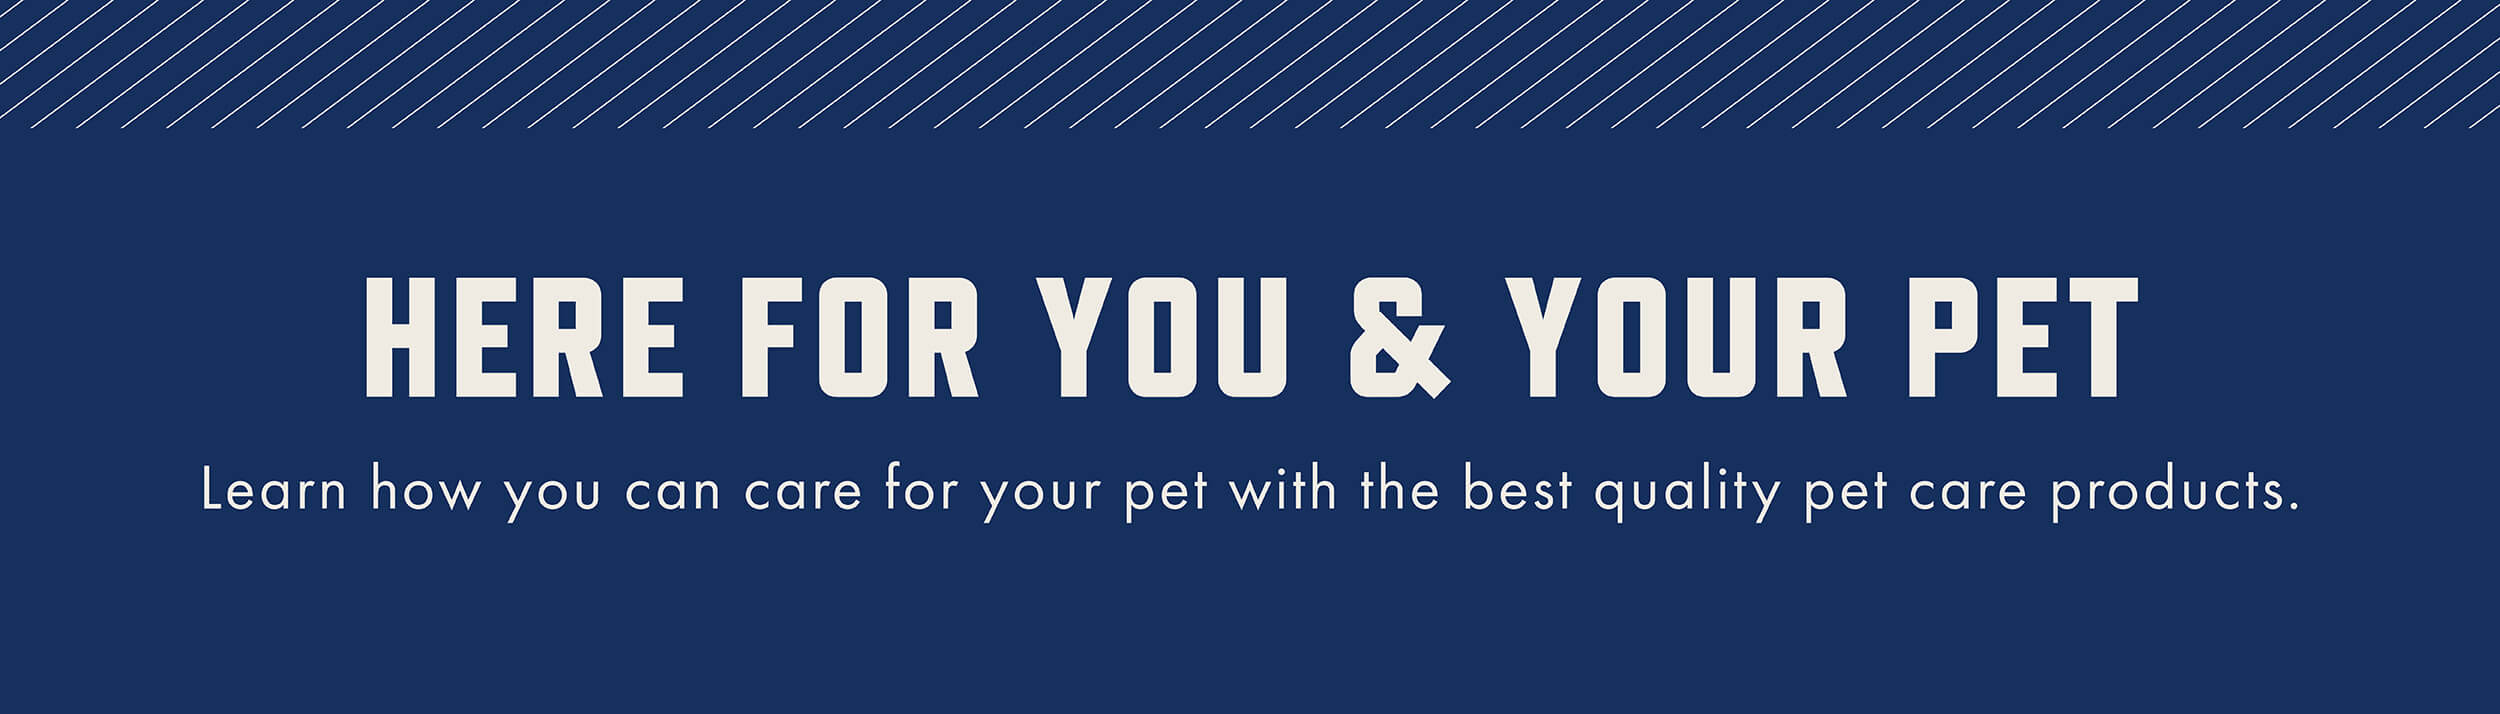 HERE FOR YOU & YOUR PET - Learn how you can care for your pet with the best quality pet care products.